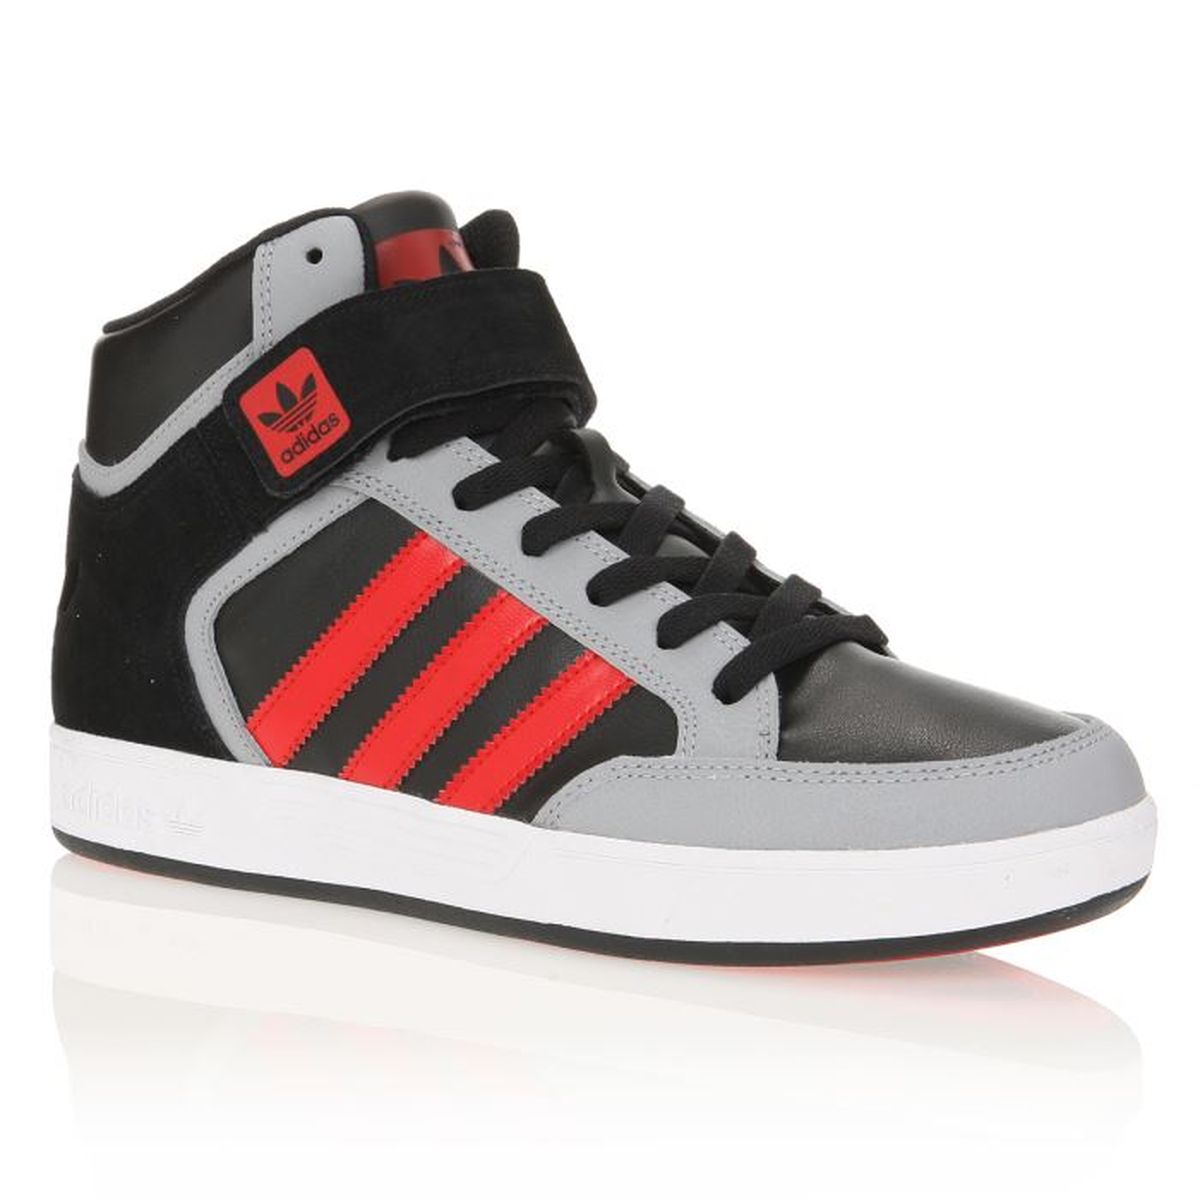 Chaussure led homme adidas pas cher varial mid